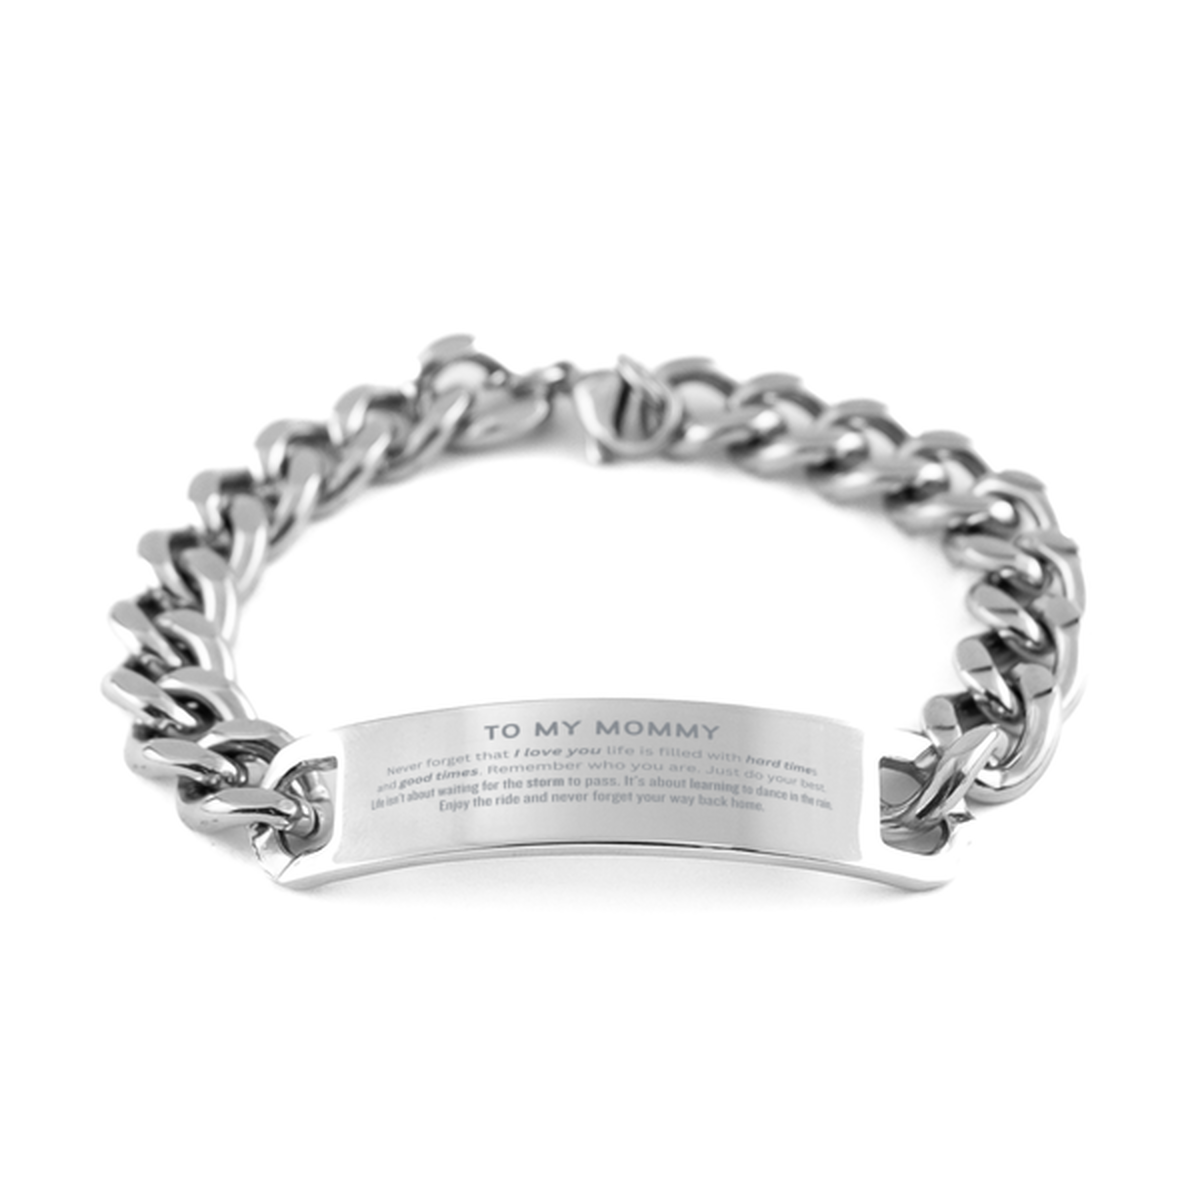 Christmas Mommy Cuban Chain Stainless Steel Bracelet Gifts, To My Mommy Birthday Thank You Gifts For Mommy, Graduation Unique Gifts For Mommy To My Mommy Never forget that I love you life is filled with hard times and good times. Remember who you are. Jus